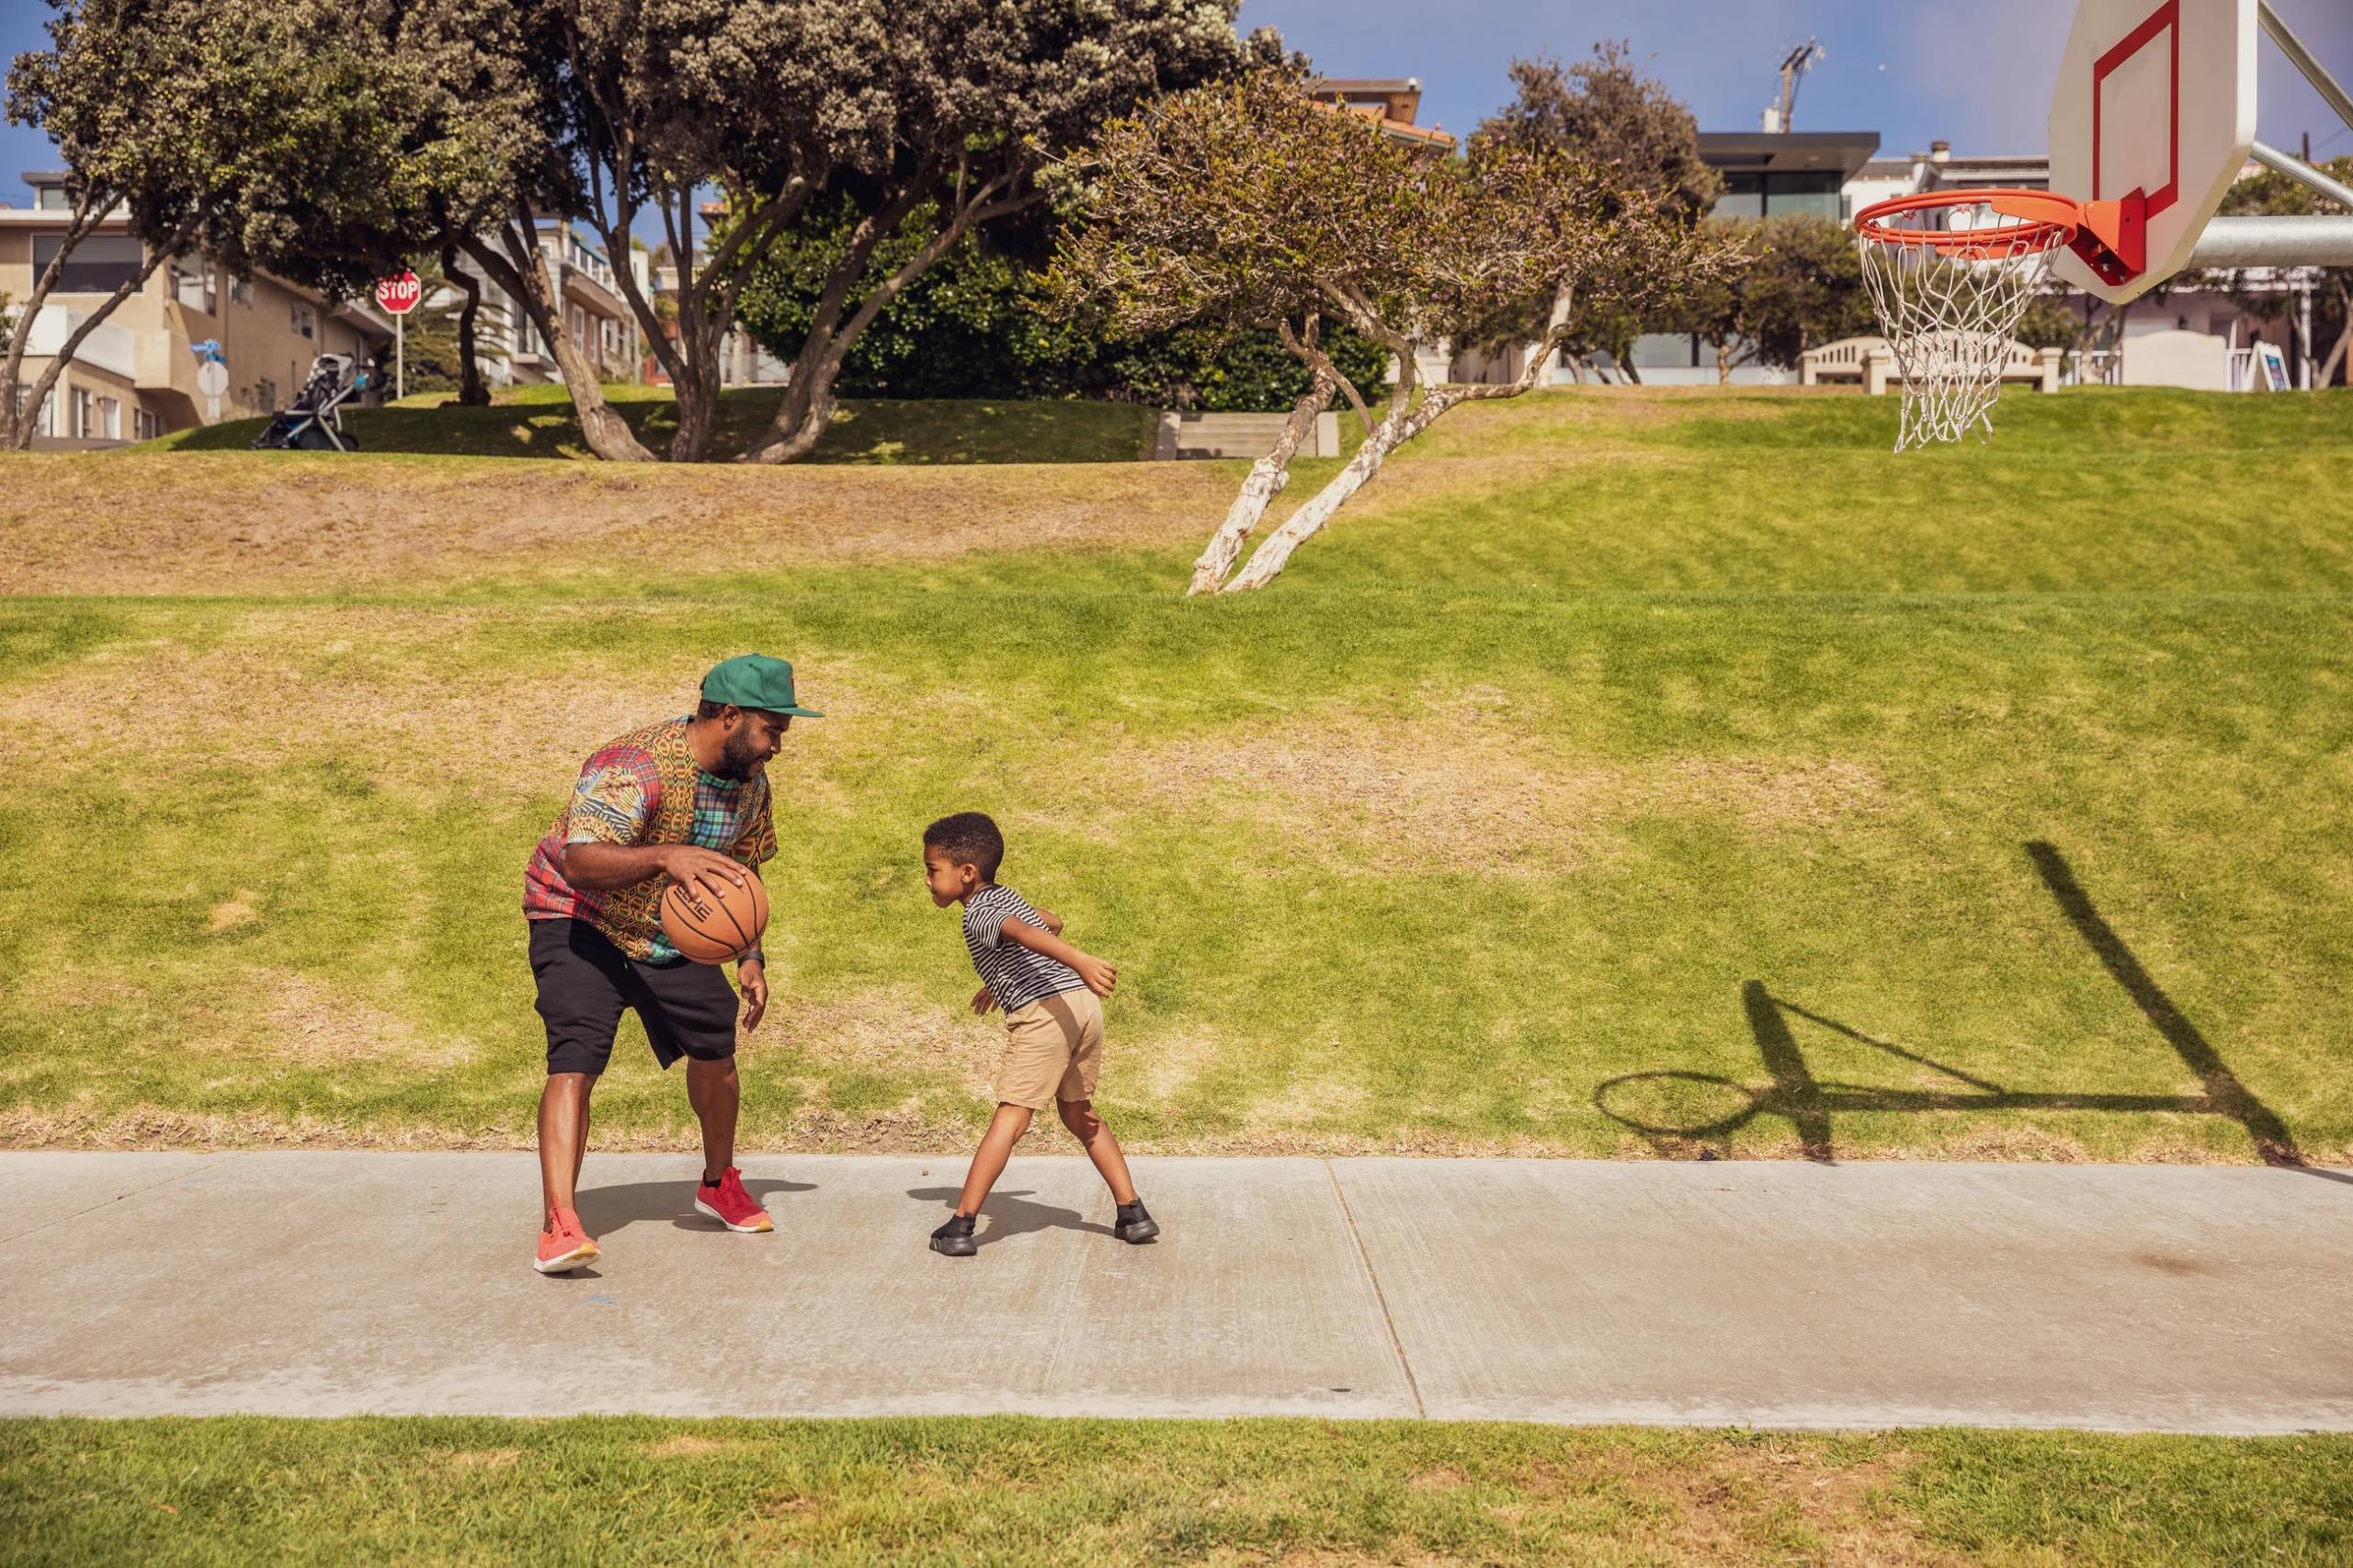 A man dribbles a basketball on a sidewalk between two green lawns with his son, who looks about 5.